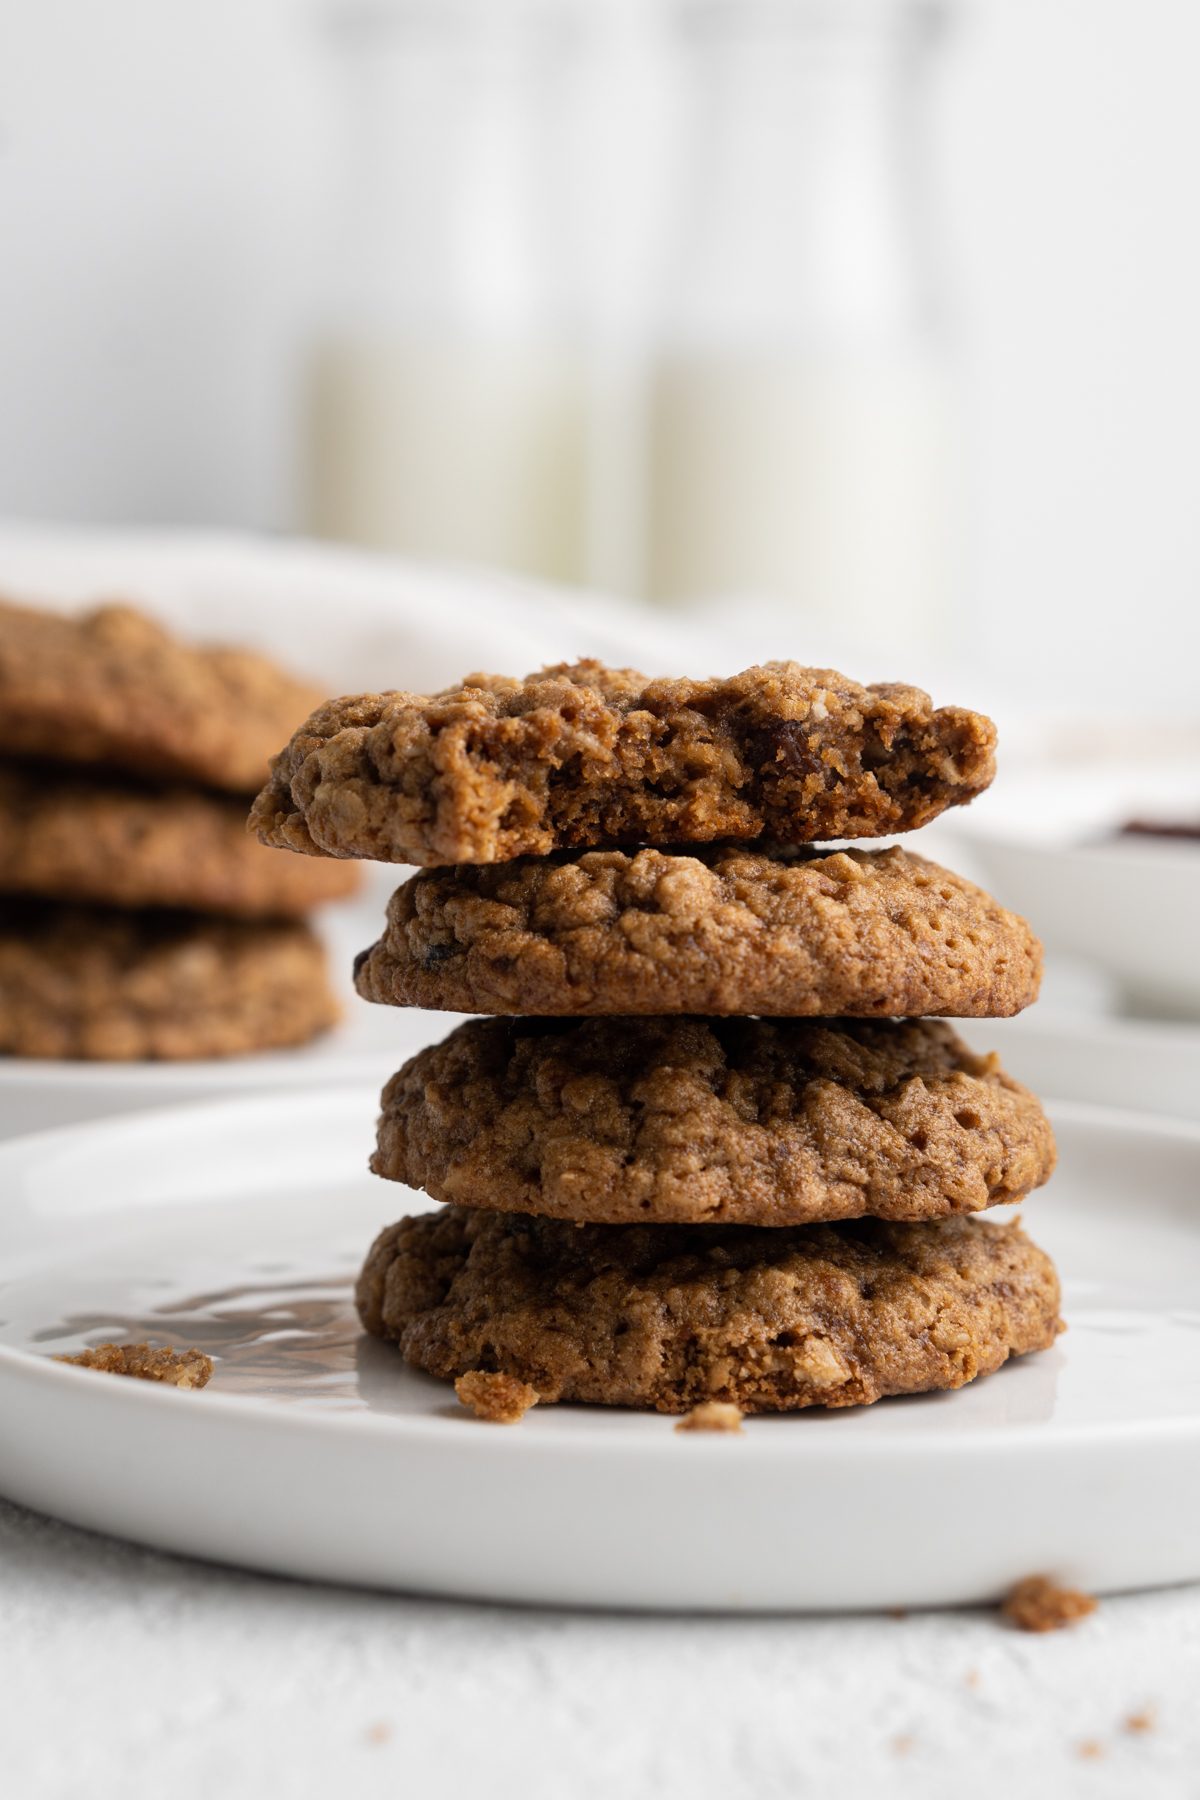 Stack of maple oatmeal cookies, one of which is missing a bite.